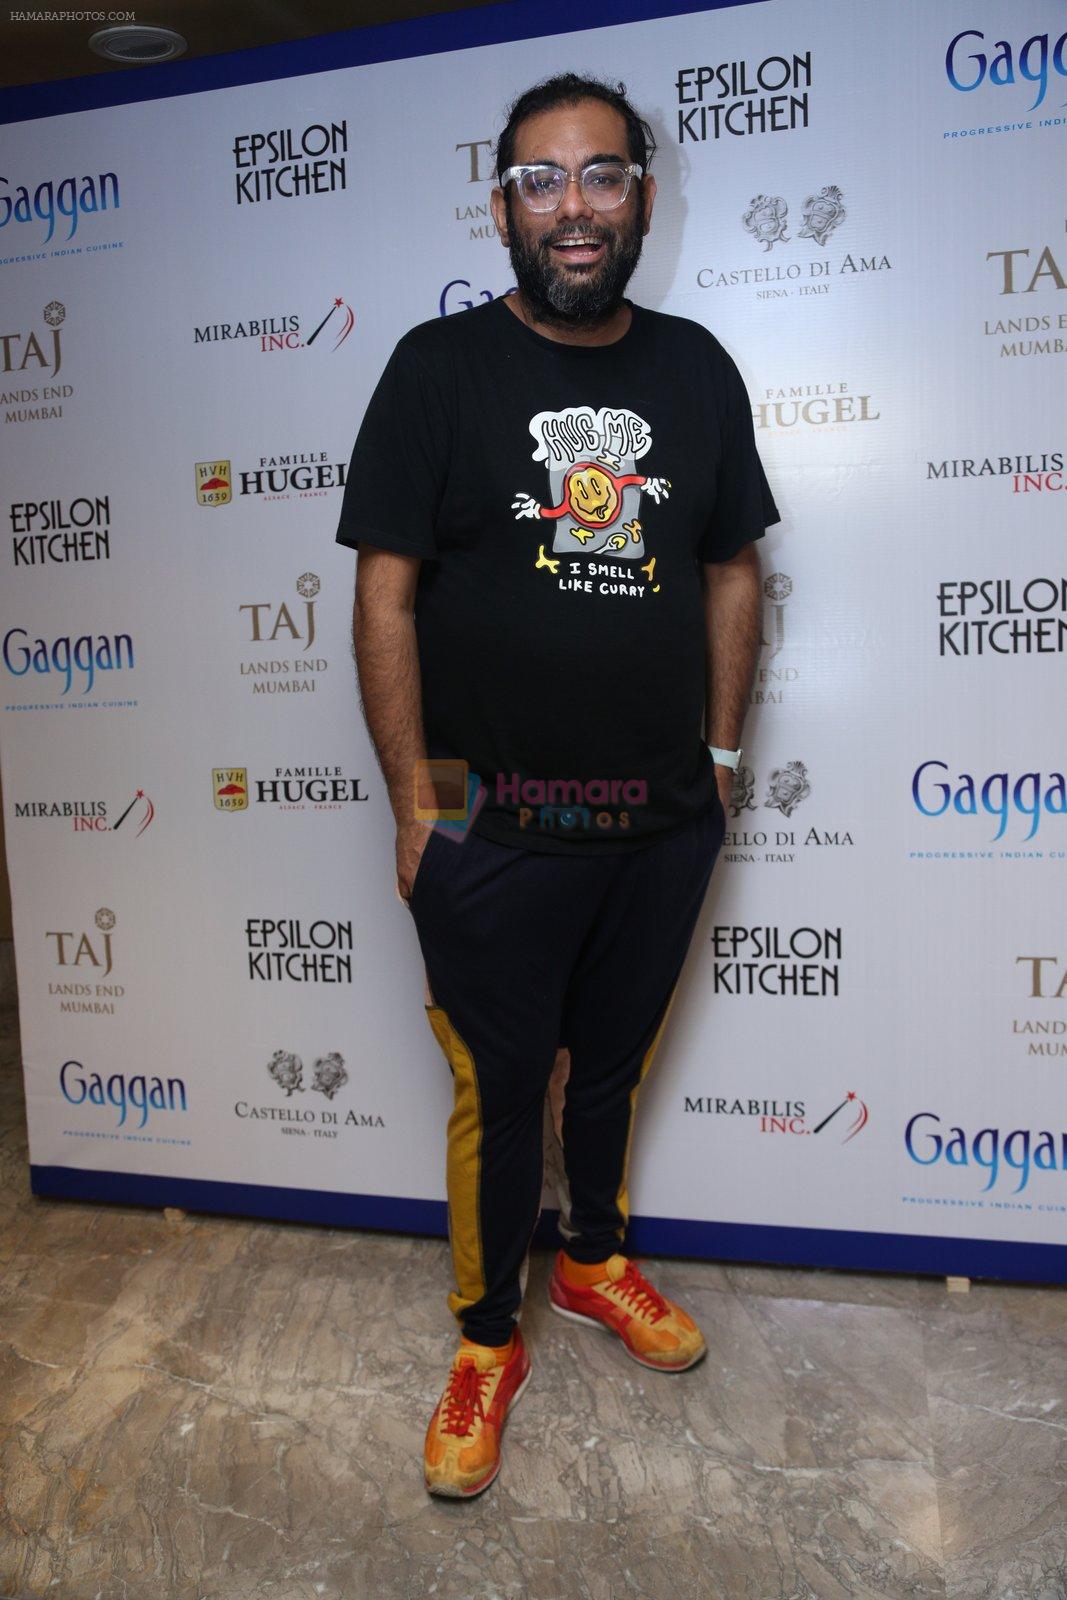 at Chef Gaggan's foodie event on 2nd Sept 2016